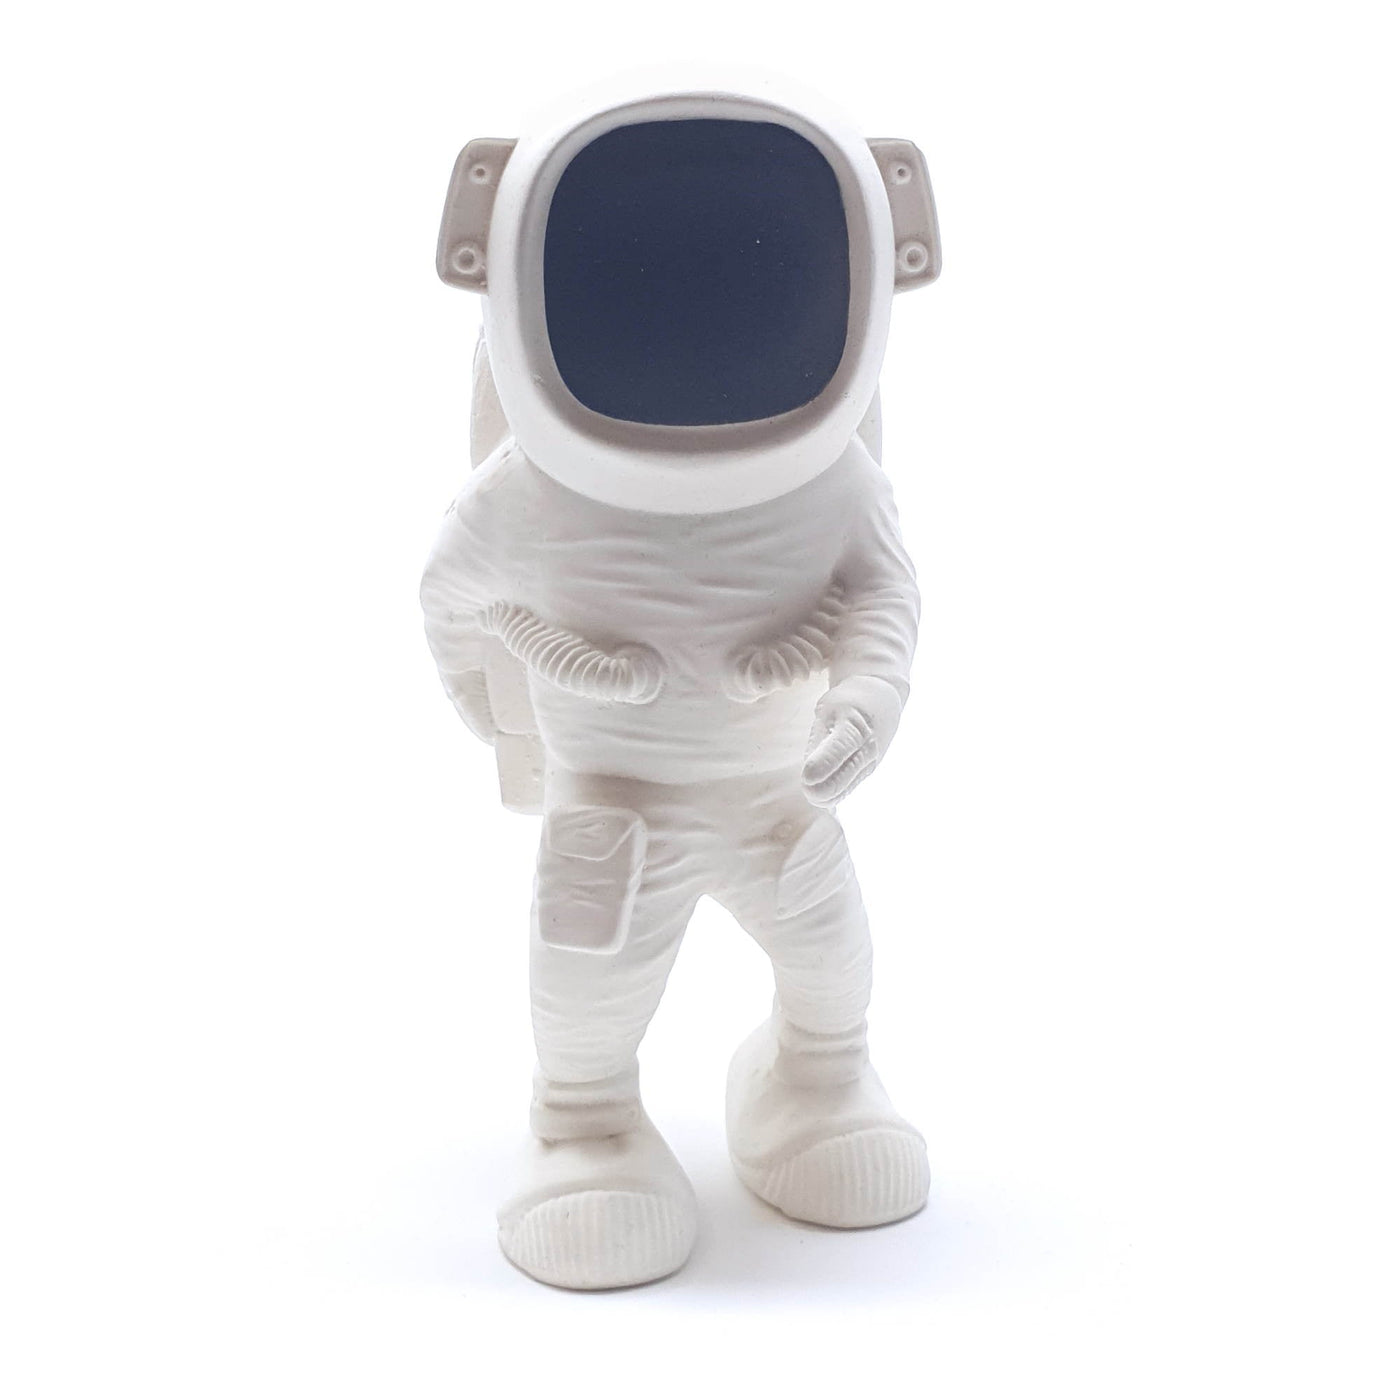 AstroGNAW Space Toy standing up by Thumble Baby Care white